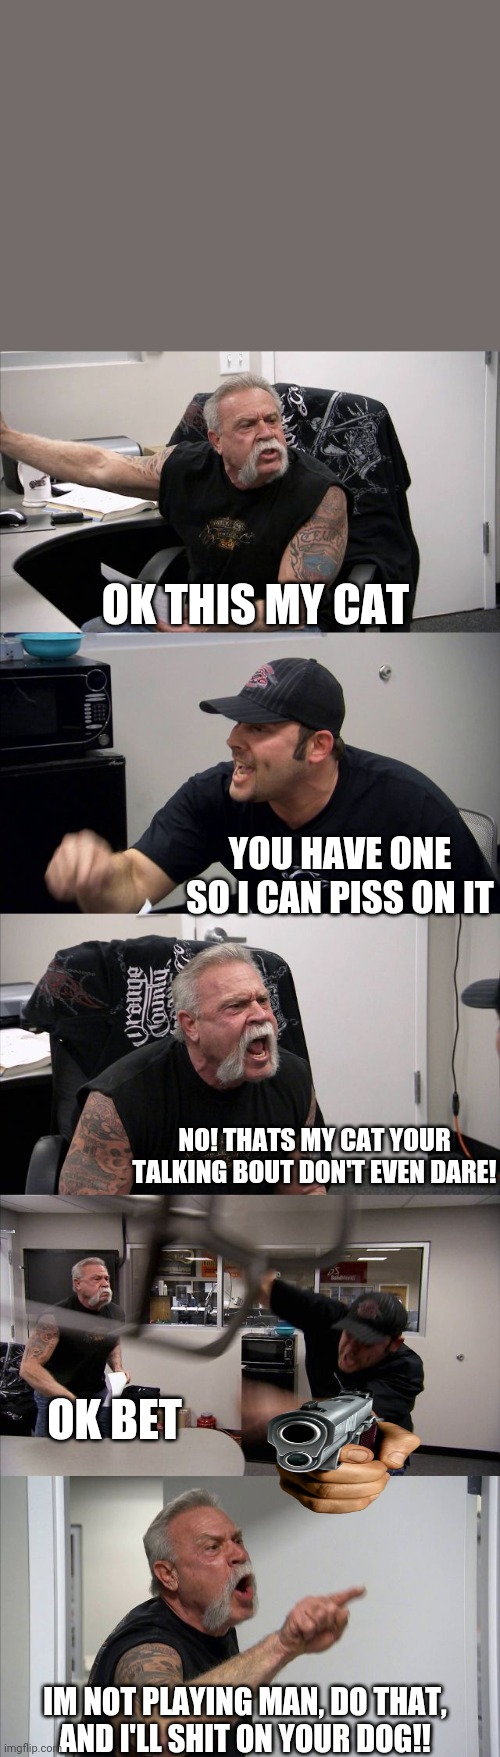 American Chopper Argument | OK THIS MY CAT; YOU HAVE ONE SO I CAN PISS ON IT; NO! THATS MY CAT YOUR TALKING BOUT DON'T EVEN DARE! OK BET; IM NOT PLAYING MAN, DO THAT,
AND I'LL SHIT ON YOUR DOG!! | image tagged in memes,american chopper argument | made w/ Imgflip meme maker